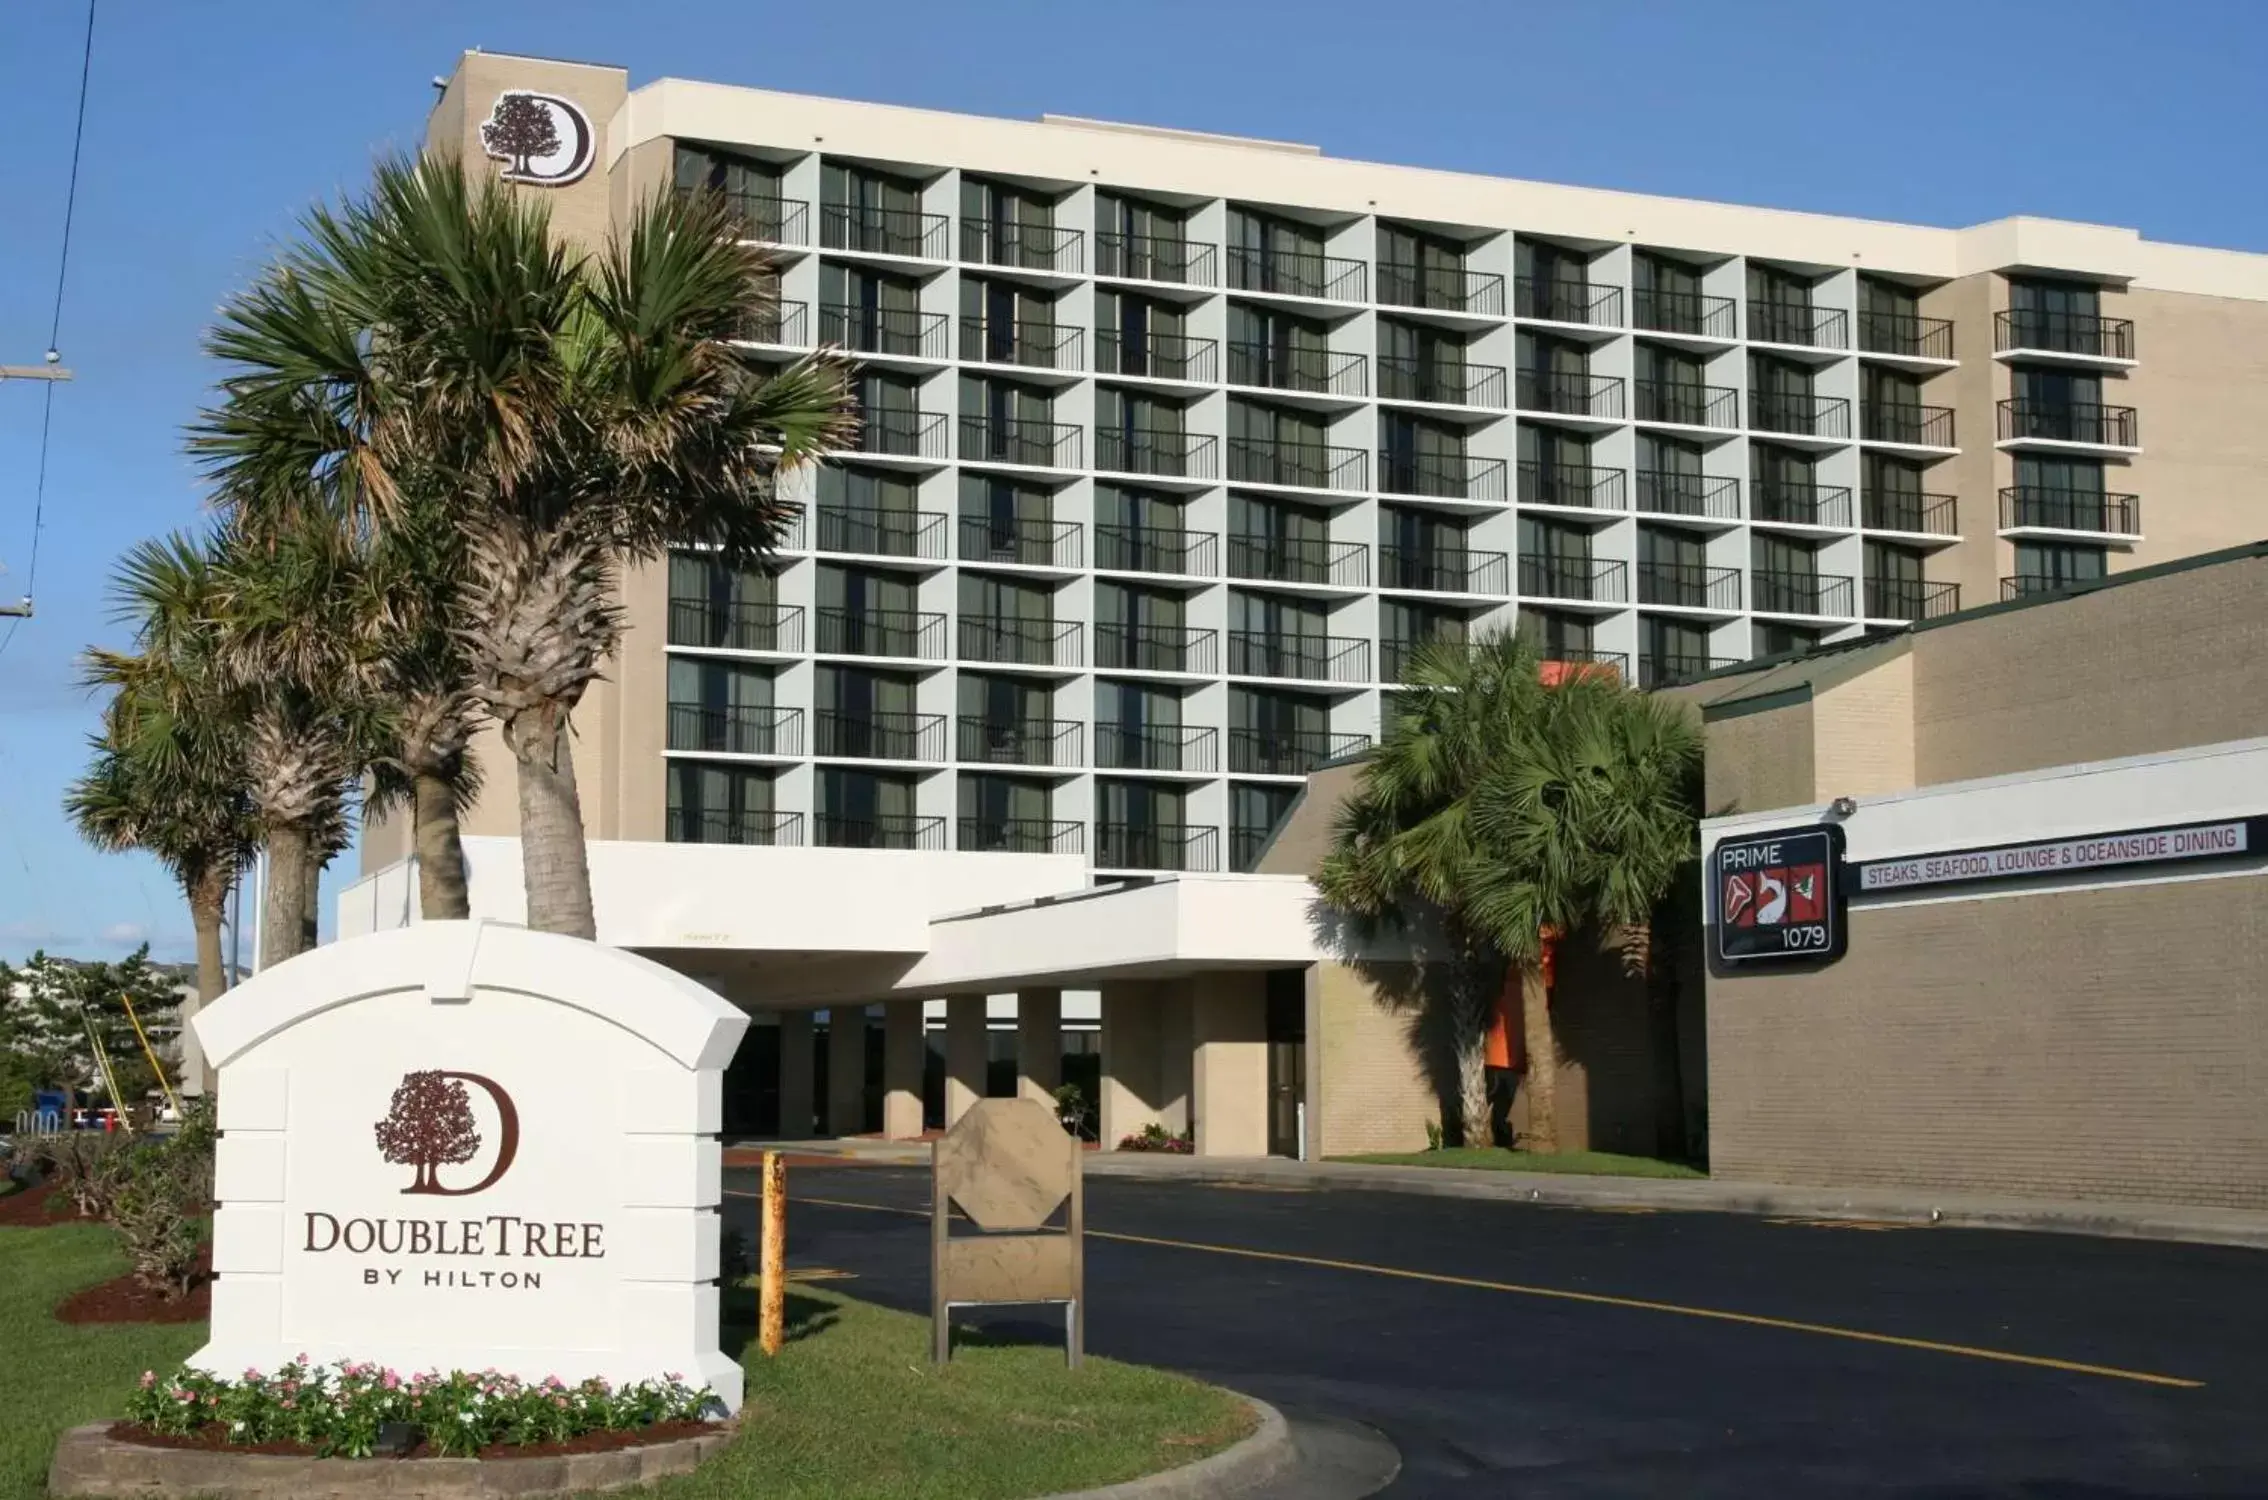 Property Building in DoubleTree by Hilton Atlantic Beach Oceanfront